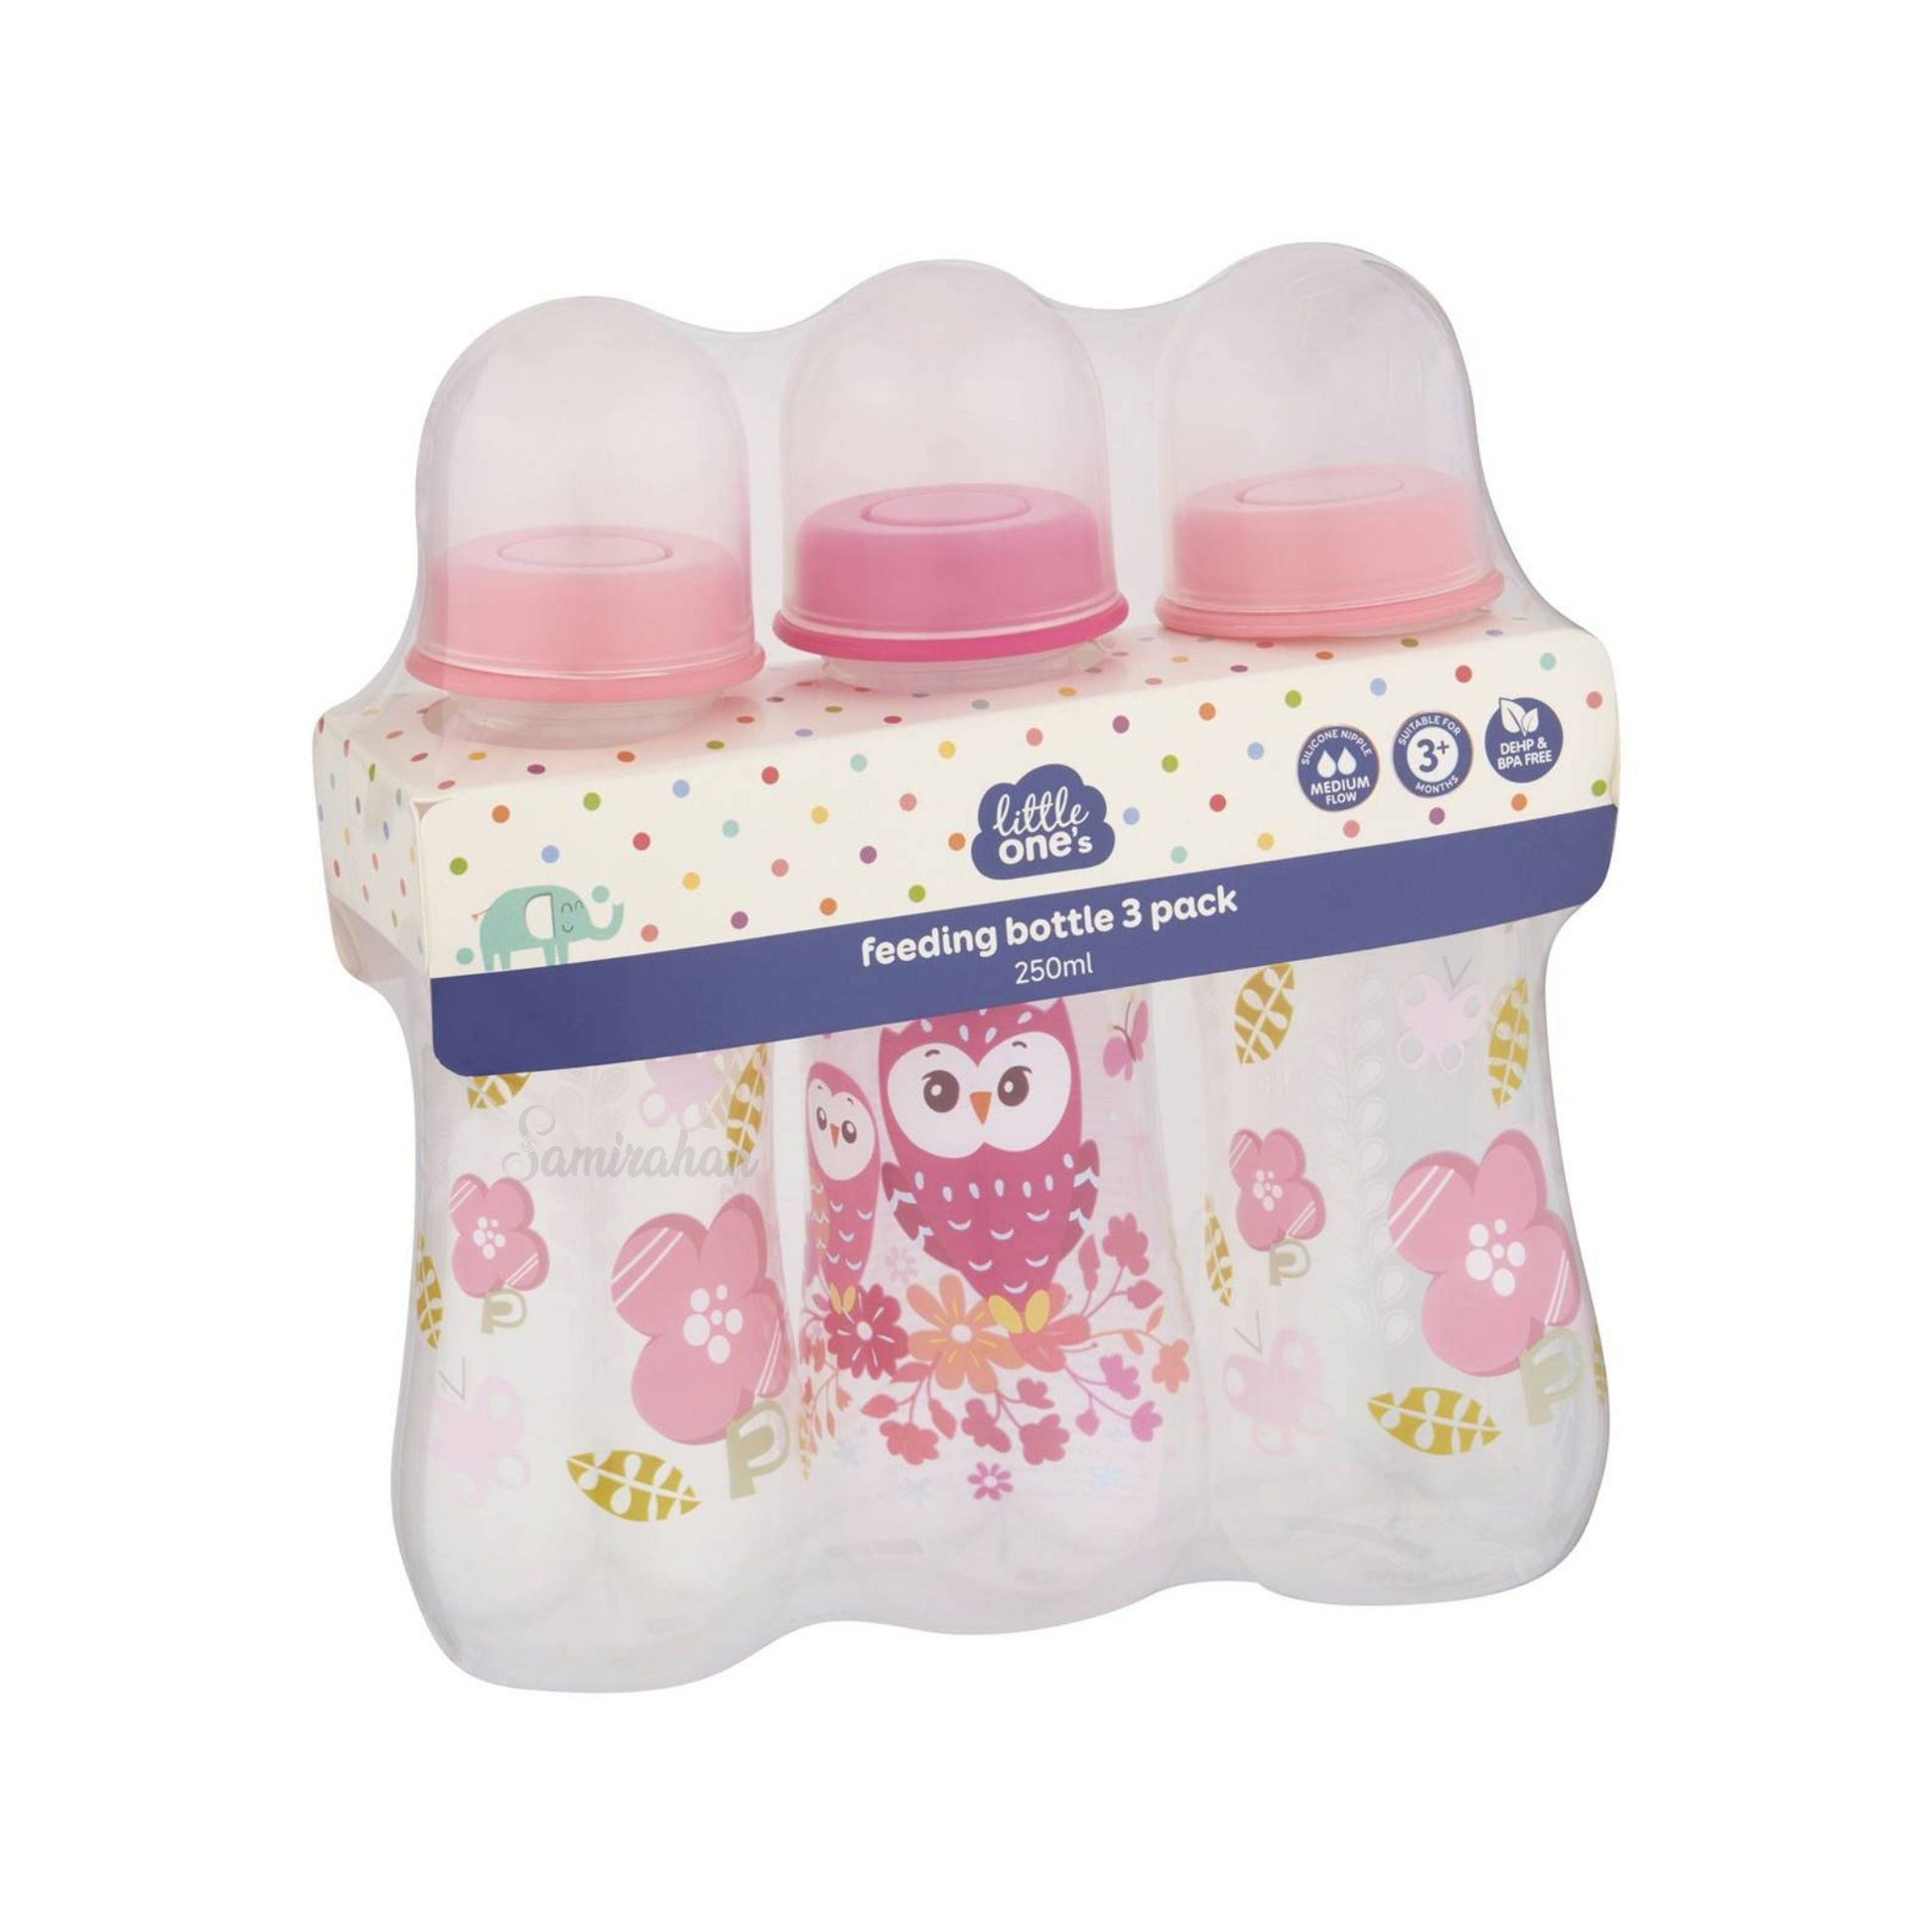 Little One's Feeding Bottles are suitable for 3+ months & DEHP & BPA free. It comes with silicone nipple, provides medium flow. Best imported foreign Australian Aussie brand baby feeder feeding bottle safe premium quality authentic genuine real cheap price in Dhaka Chittagong Sylhet Barisal Comilla Rajshahi Bangladesh.